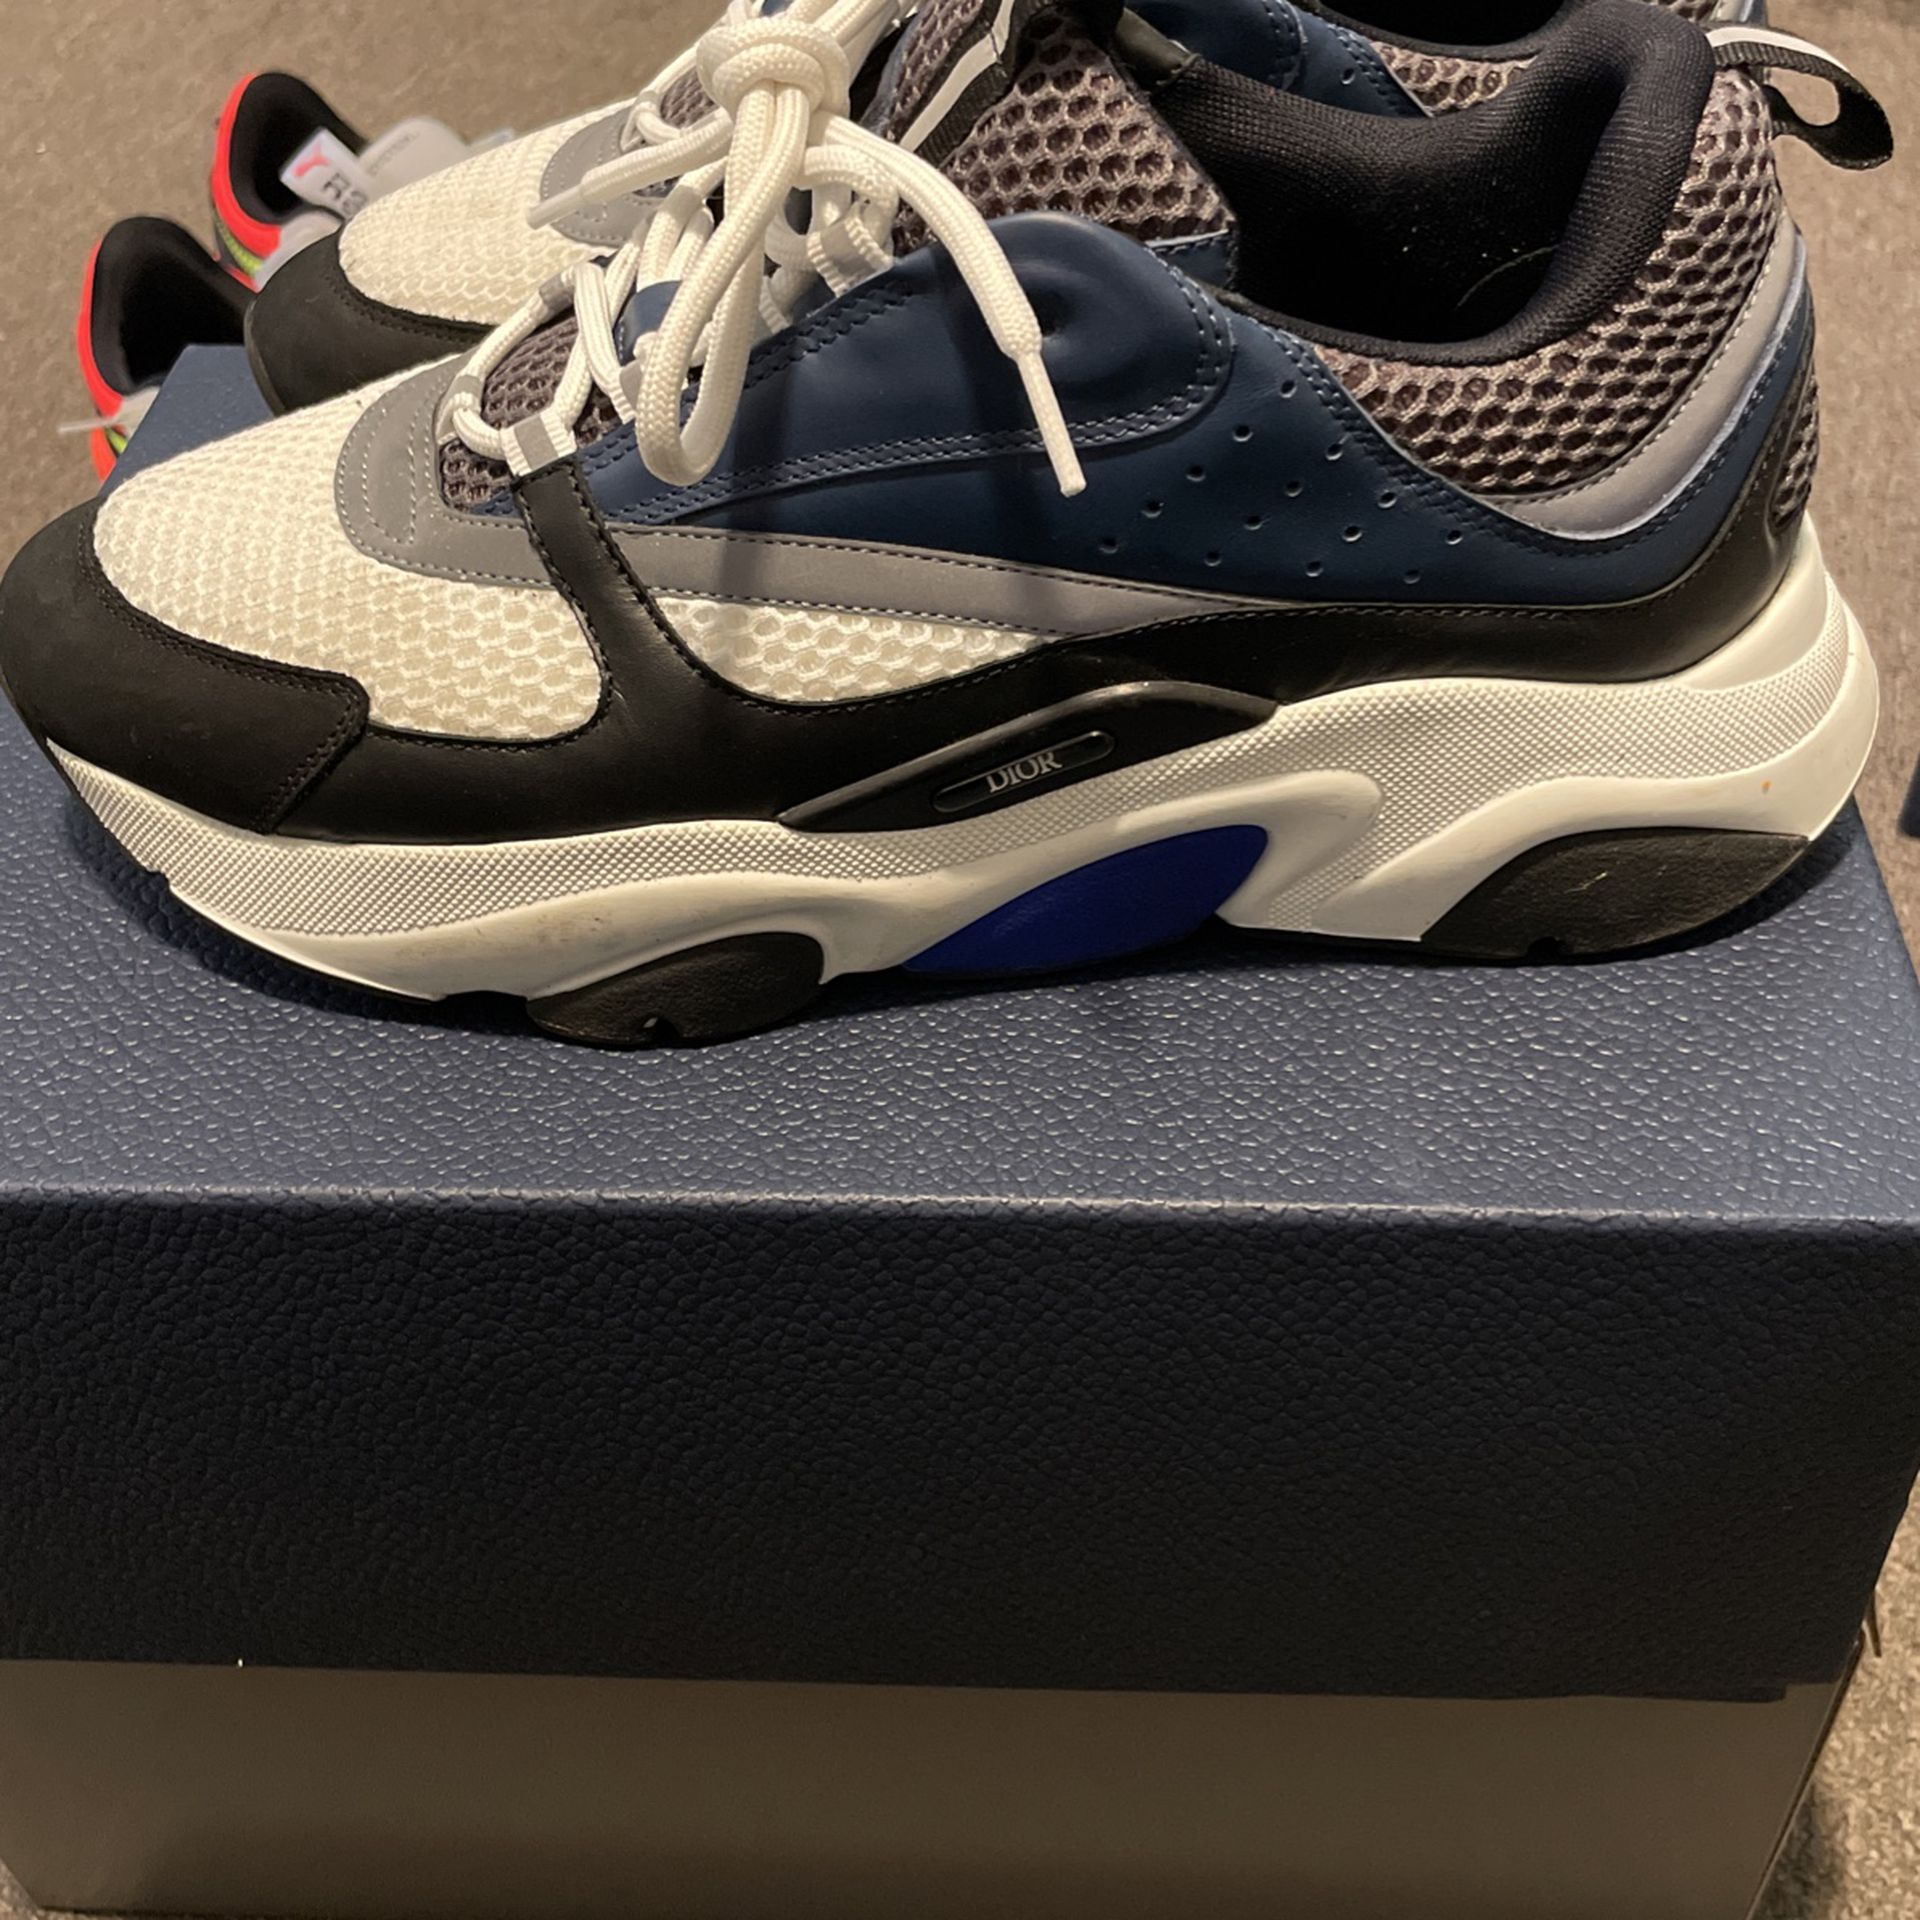 Dior B22 sneakers for Sale in Saint Charles, MD - OfferUp